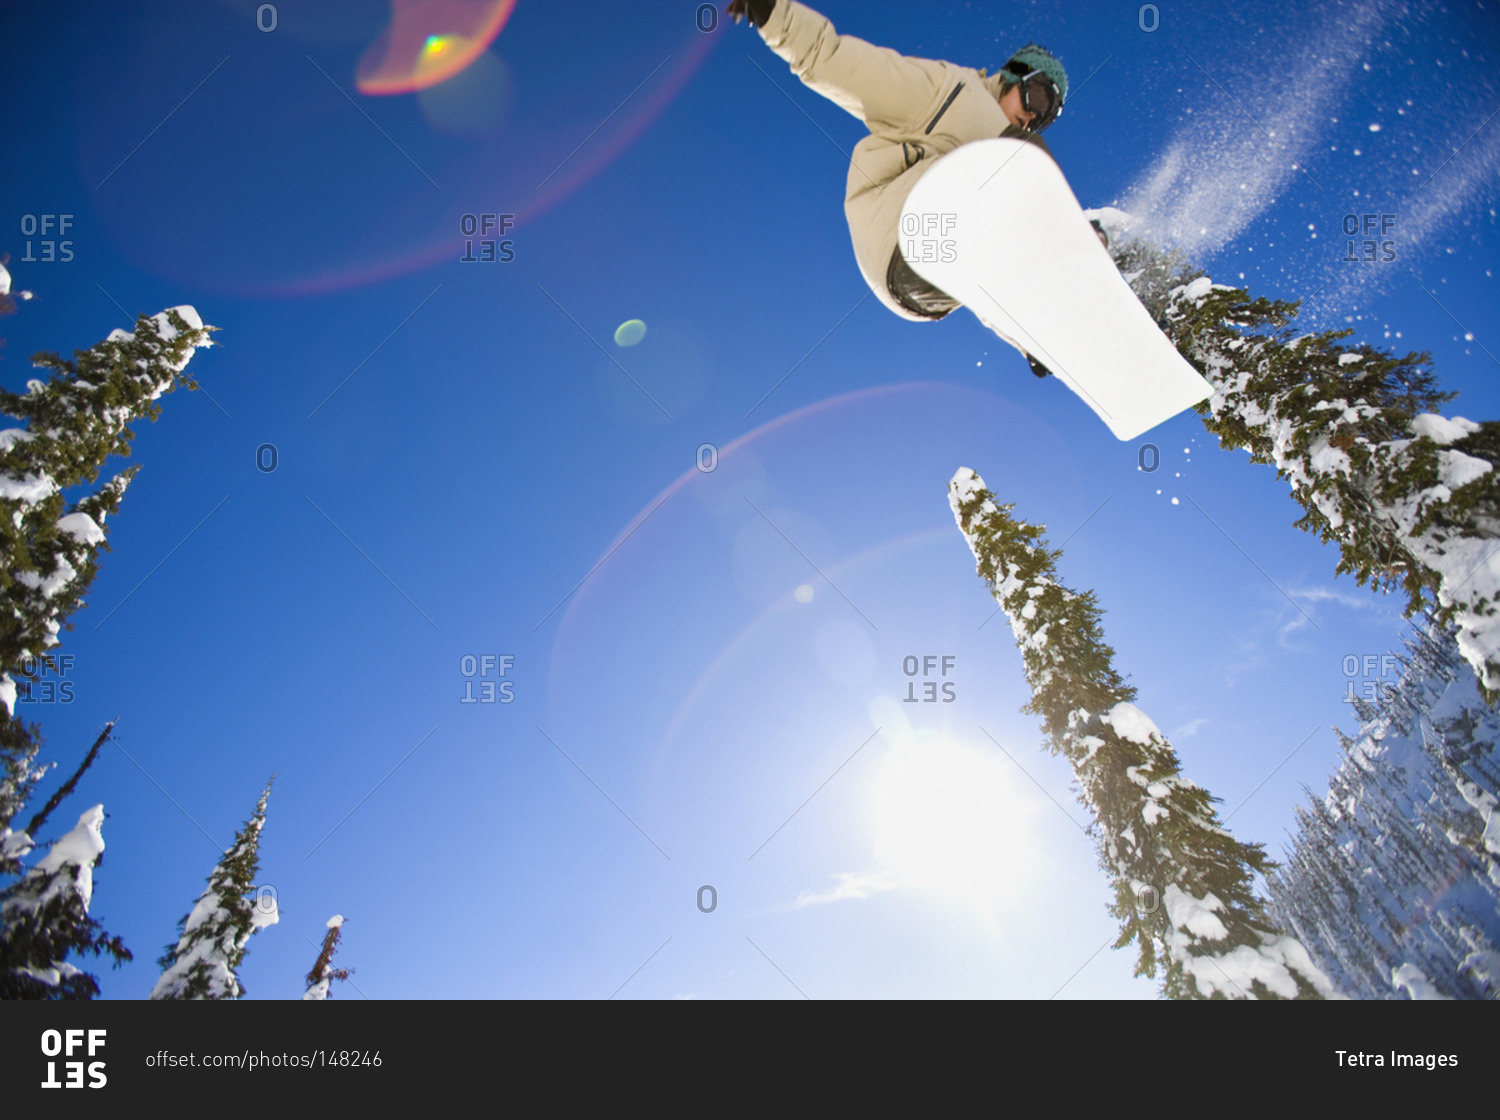 Young man snowboarding in forest